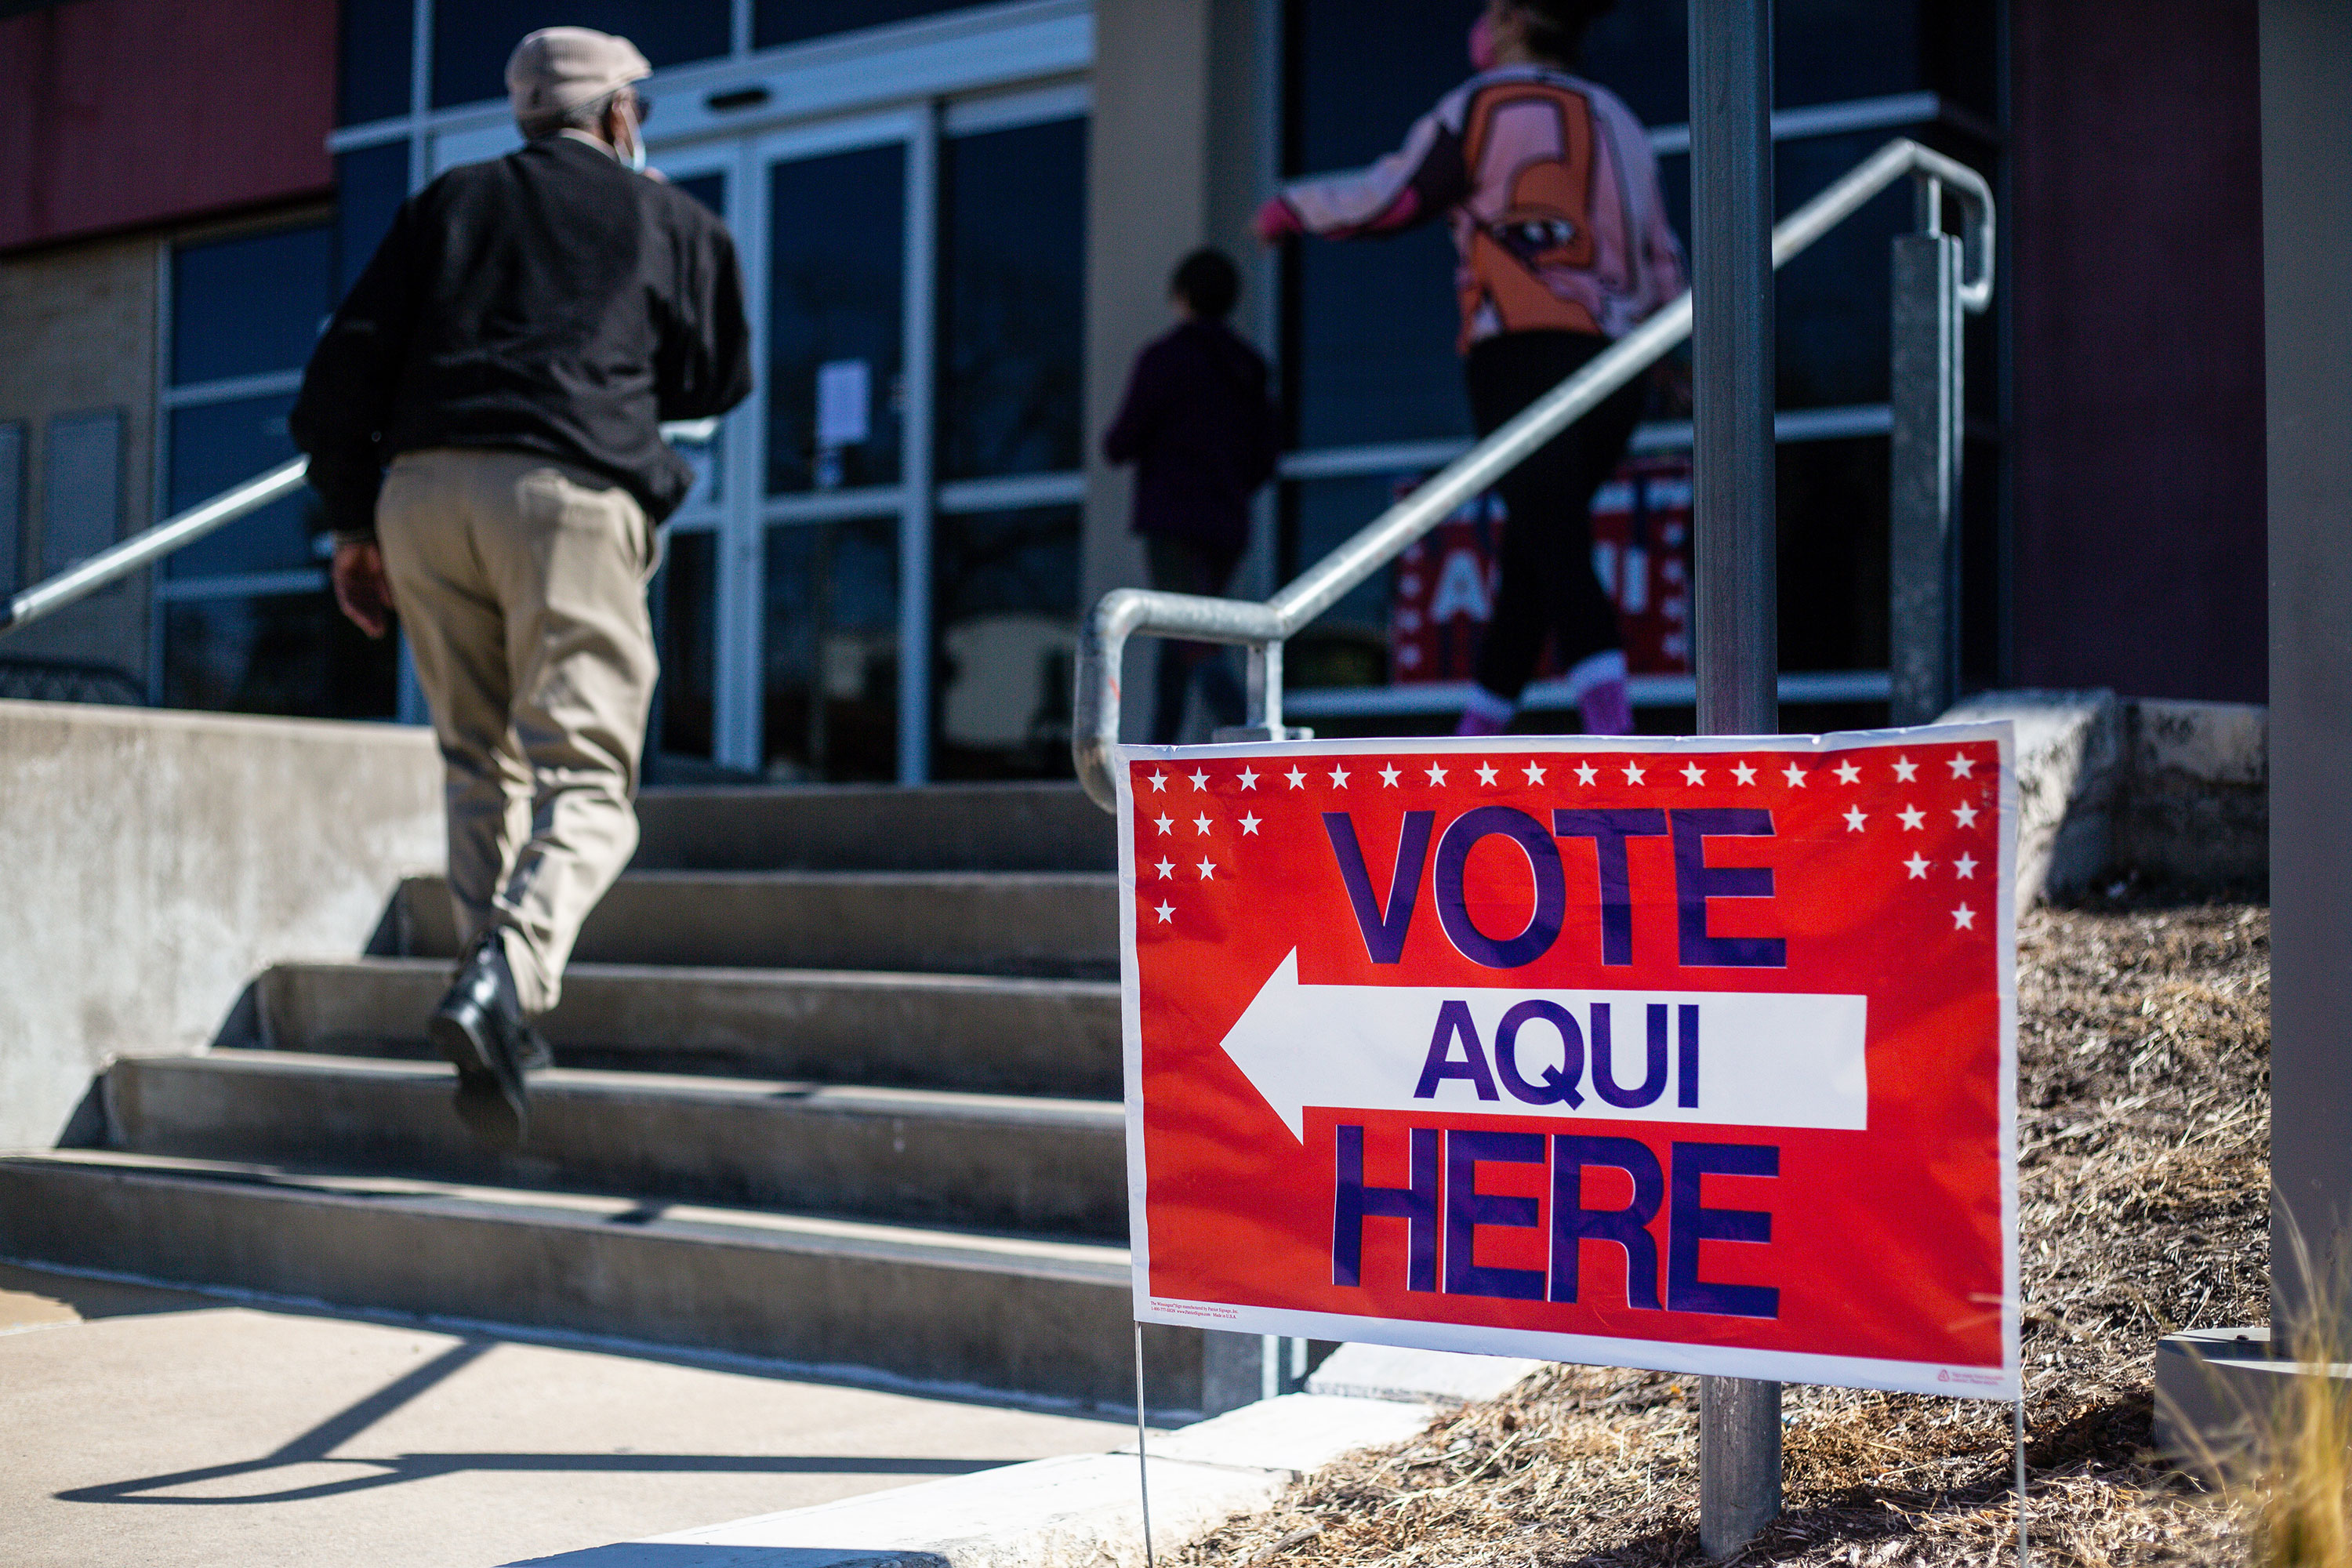 People arrive at a voting center in Austin, Texas, on March 1.